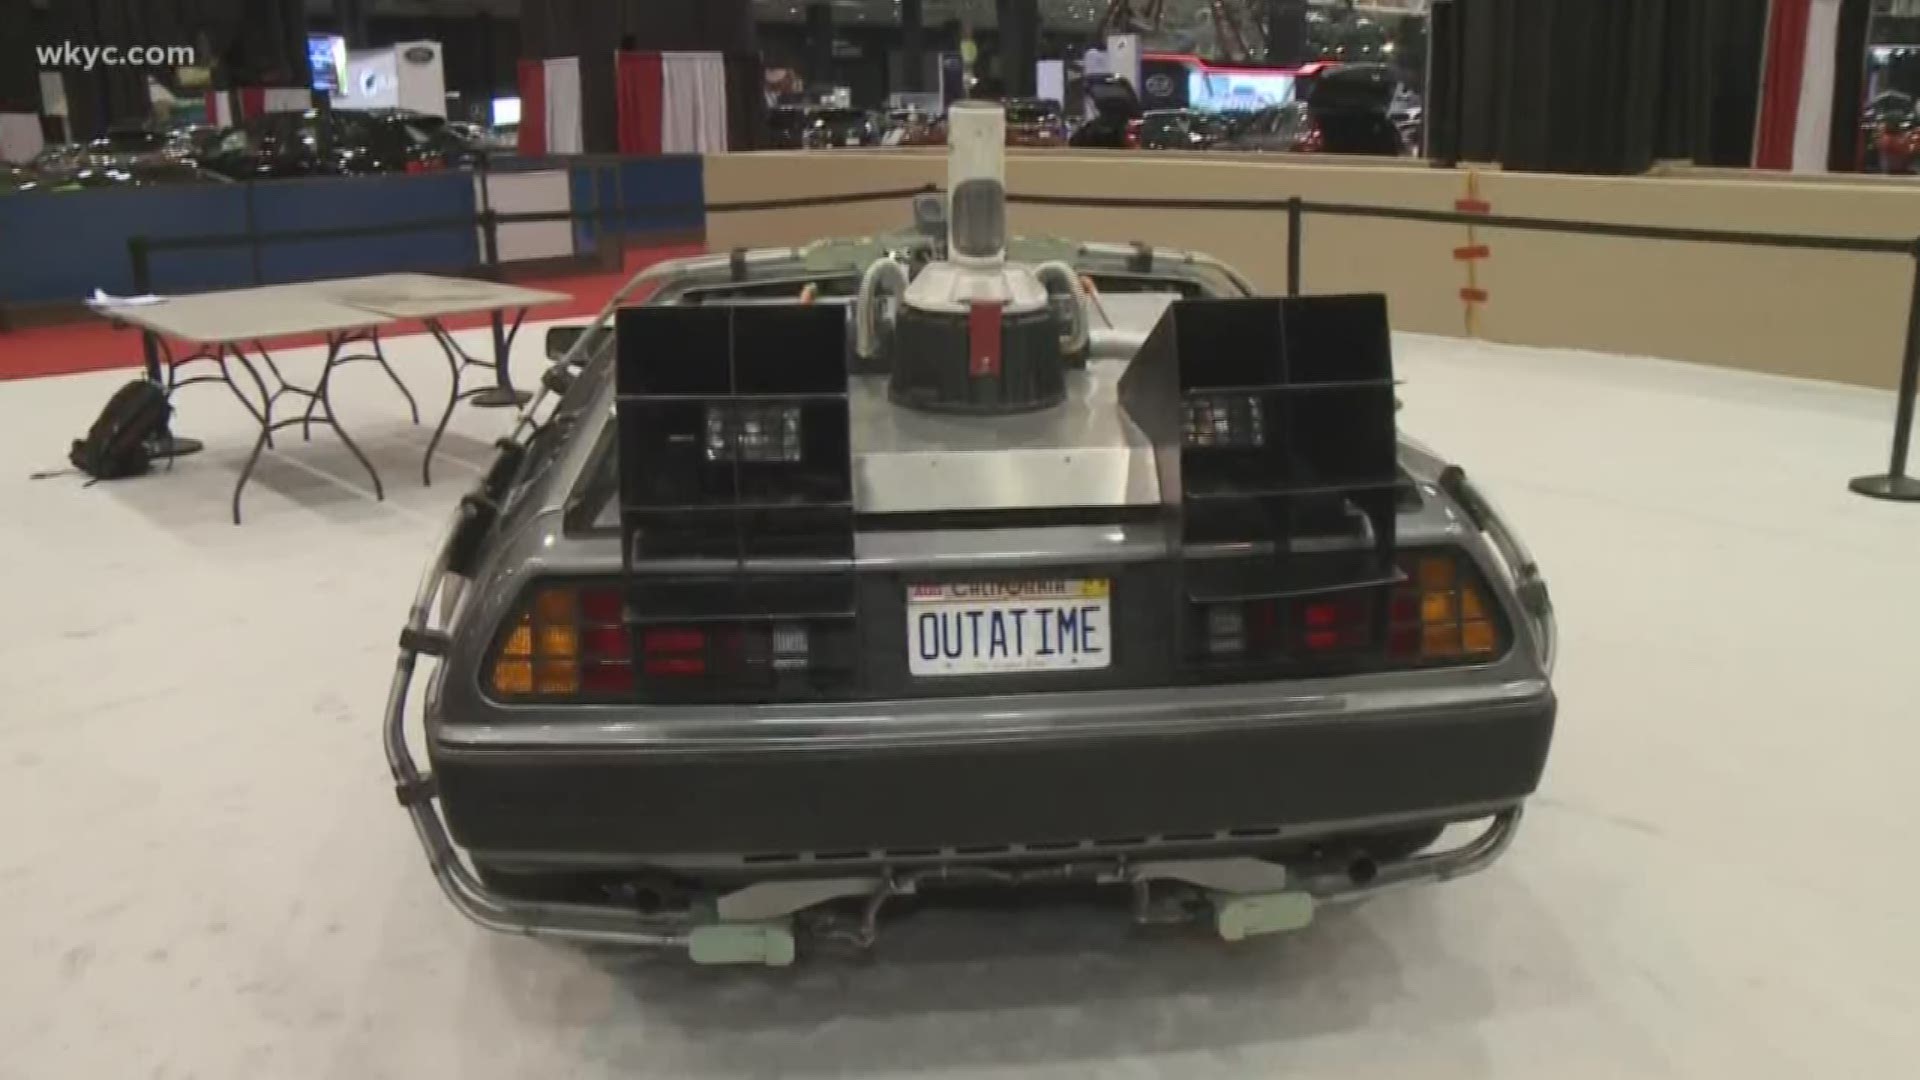 How cool is this? You can get an up-close glimpse at some of the coolest screen-used cars throughout the Cleveland Auto Show, including a DeLoreon 'Time Machine.'